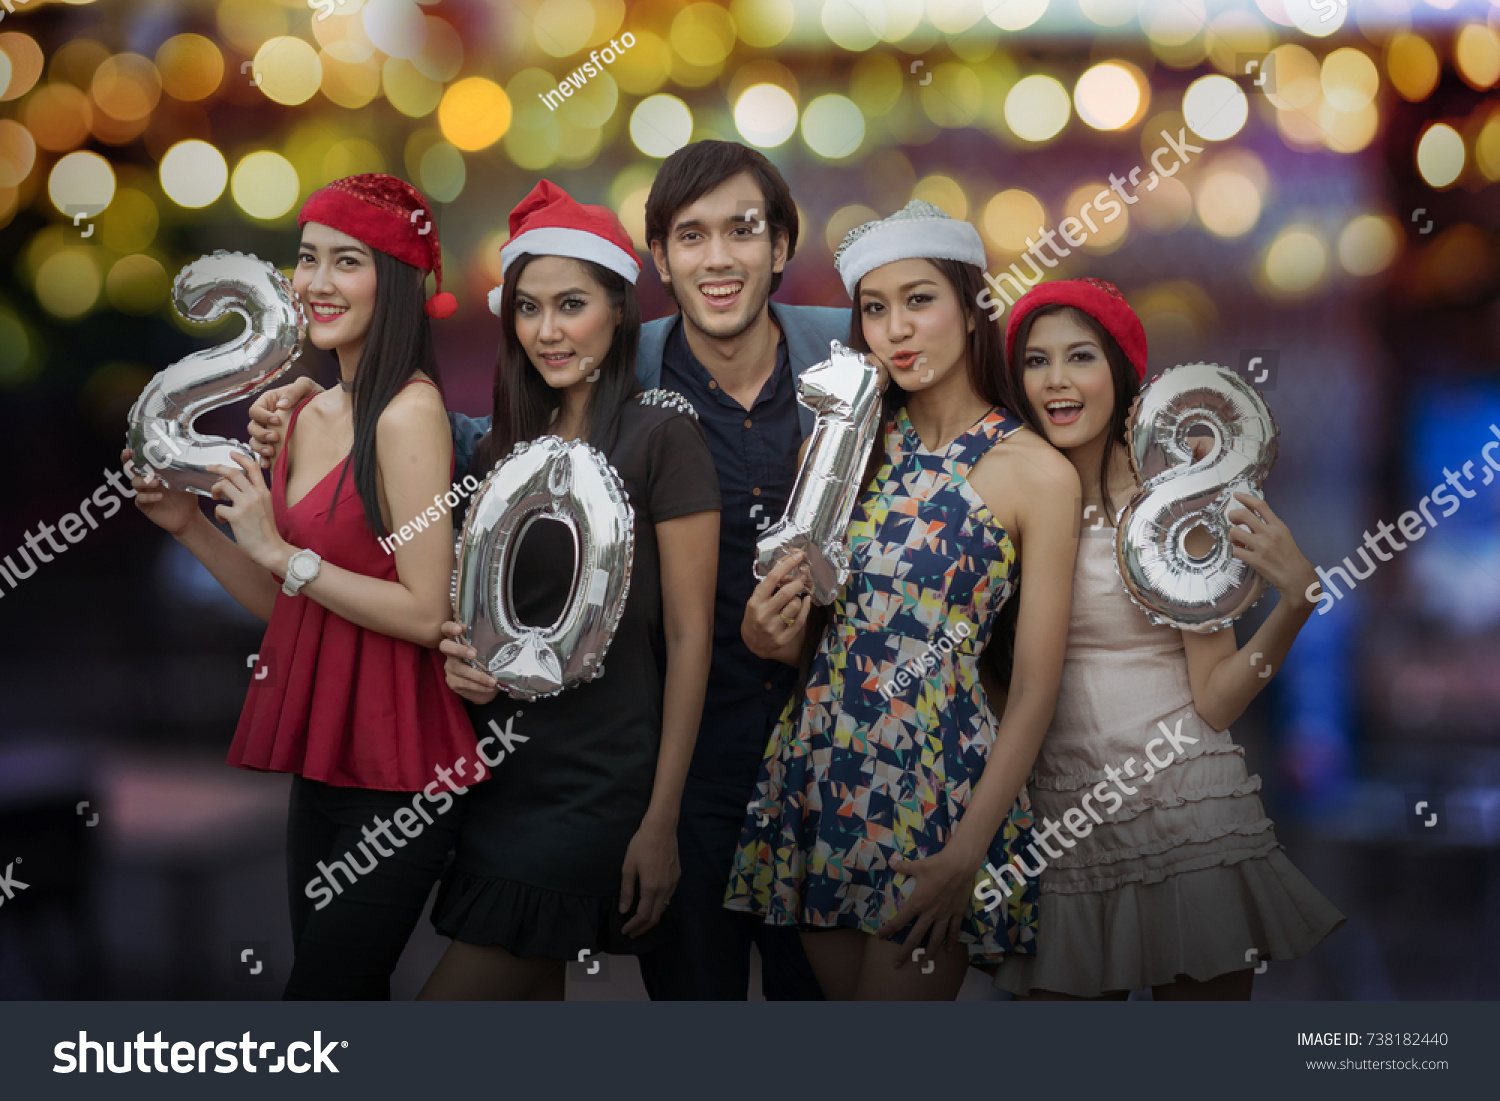 Cheerful young people holding cardboard number in night party, New Year's Party 2018 concept. #738182440